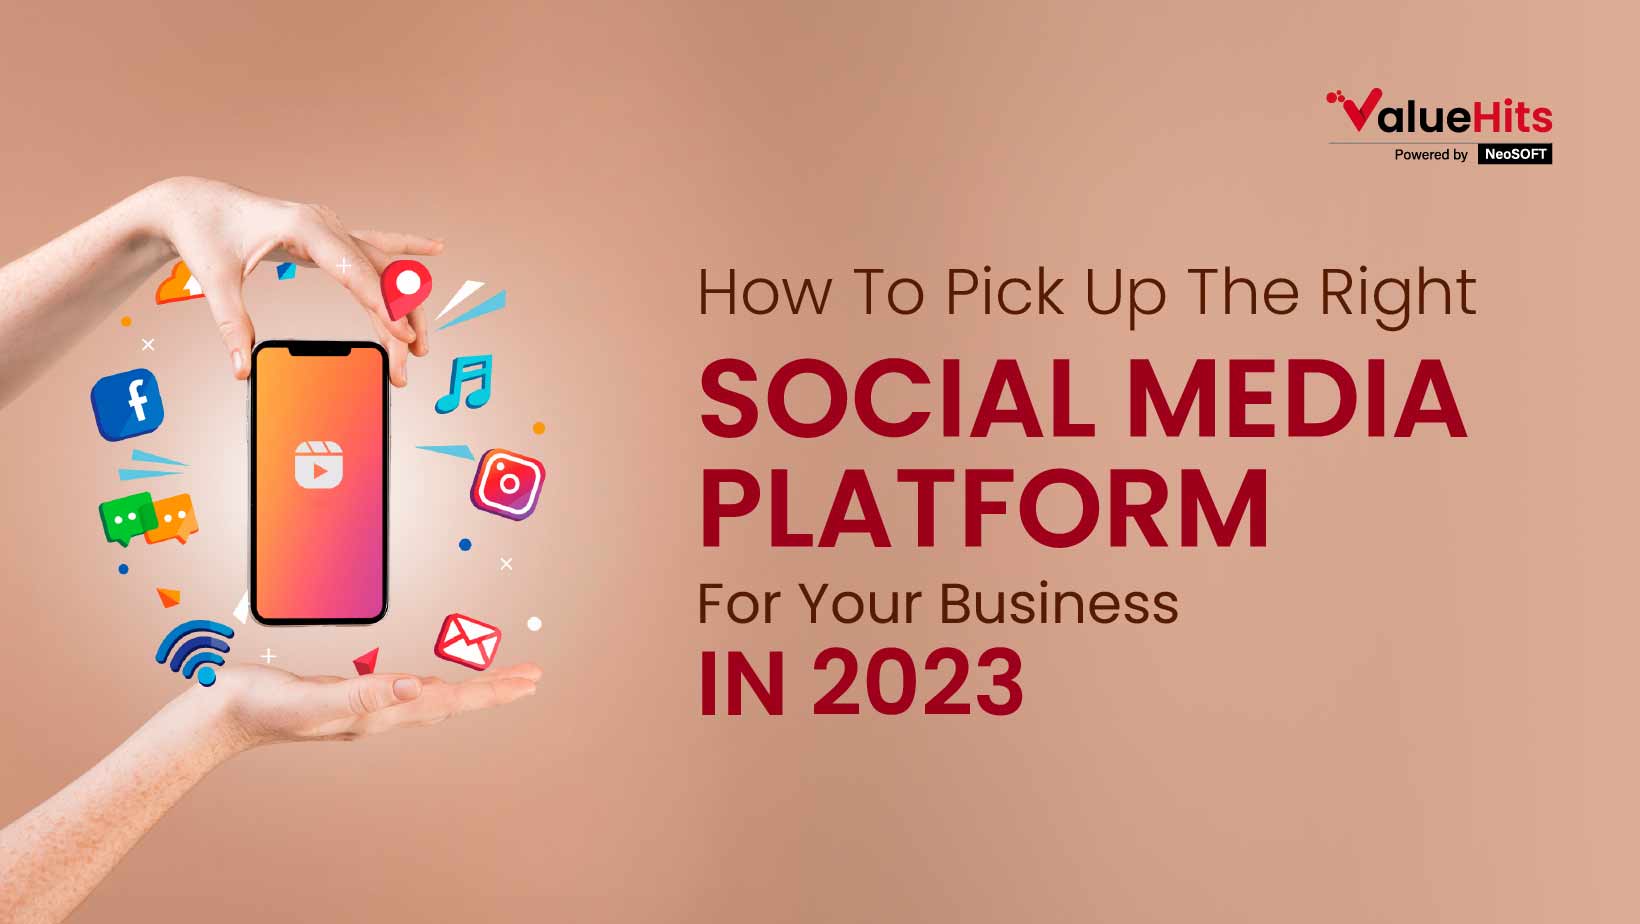 How To Pick Up The Right Social Media Platform For Your Business In 2023